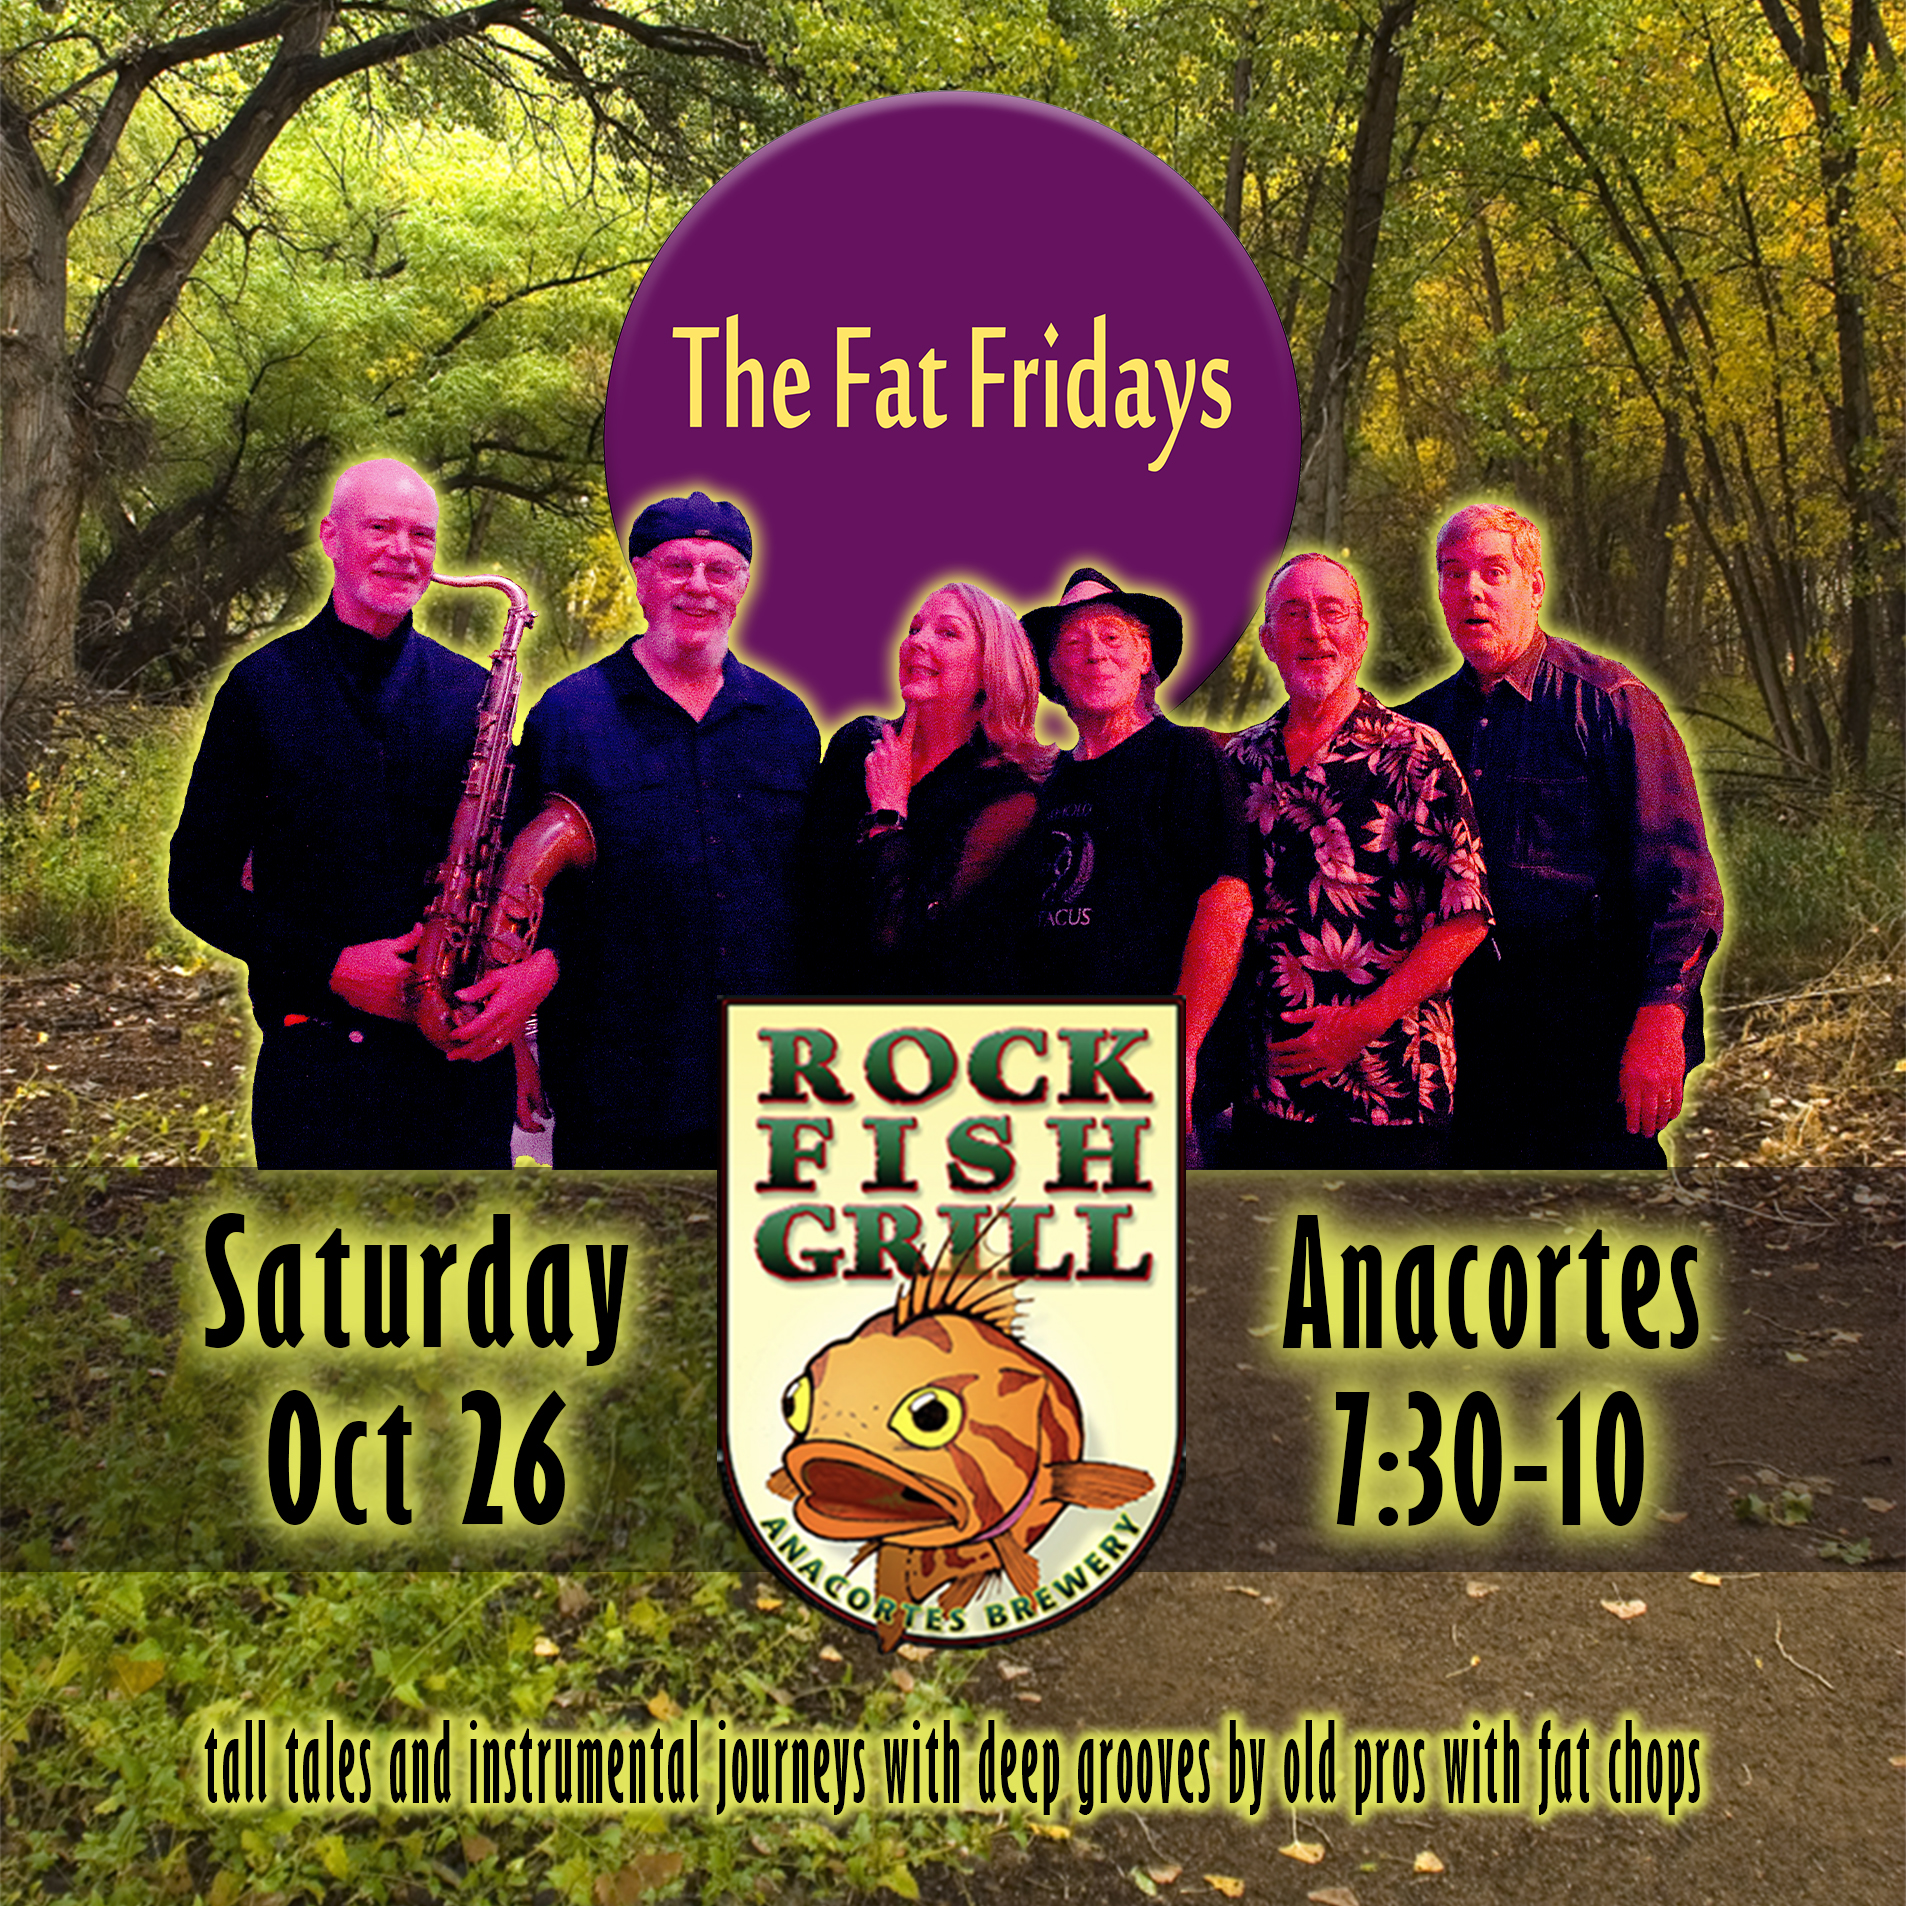 The Fat Fridays at the Rockfish Grill